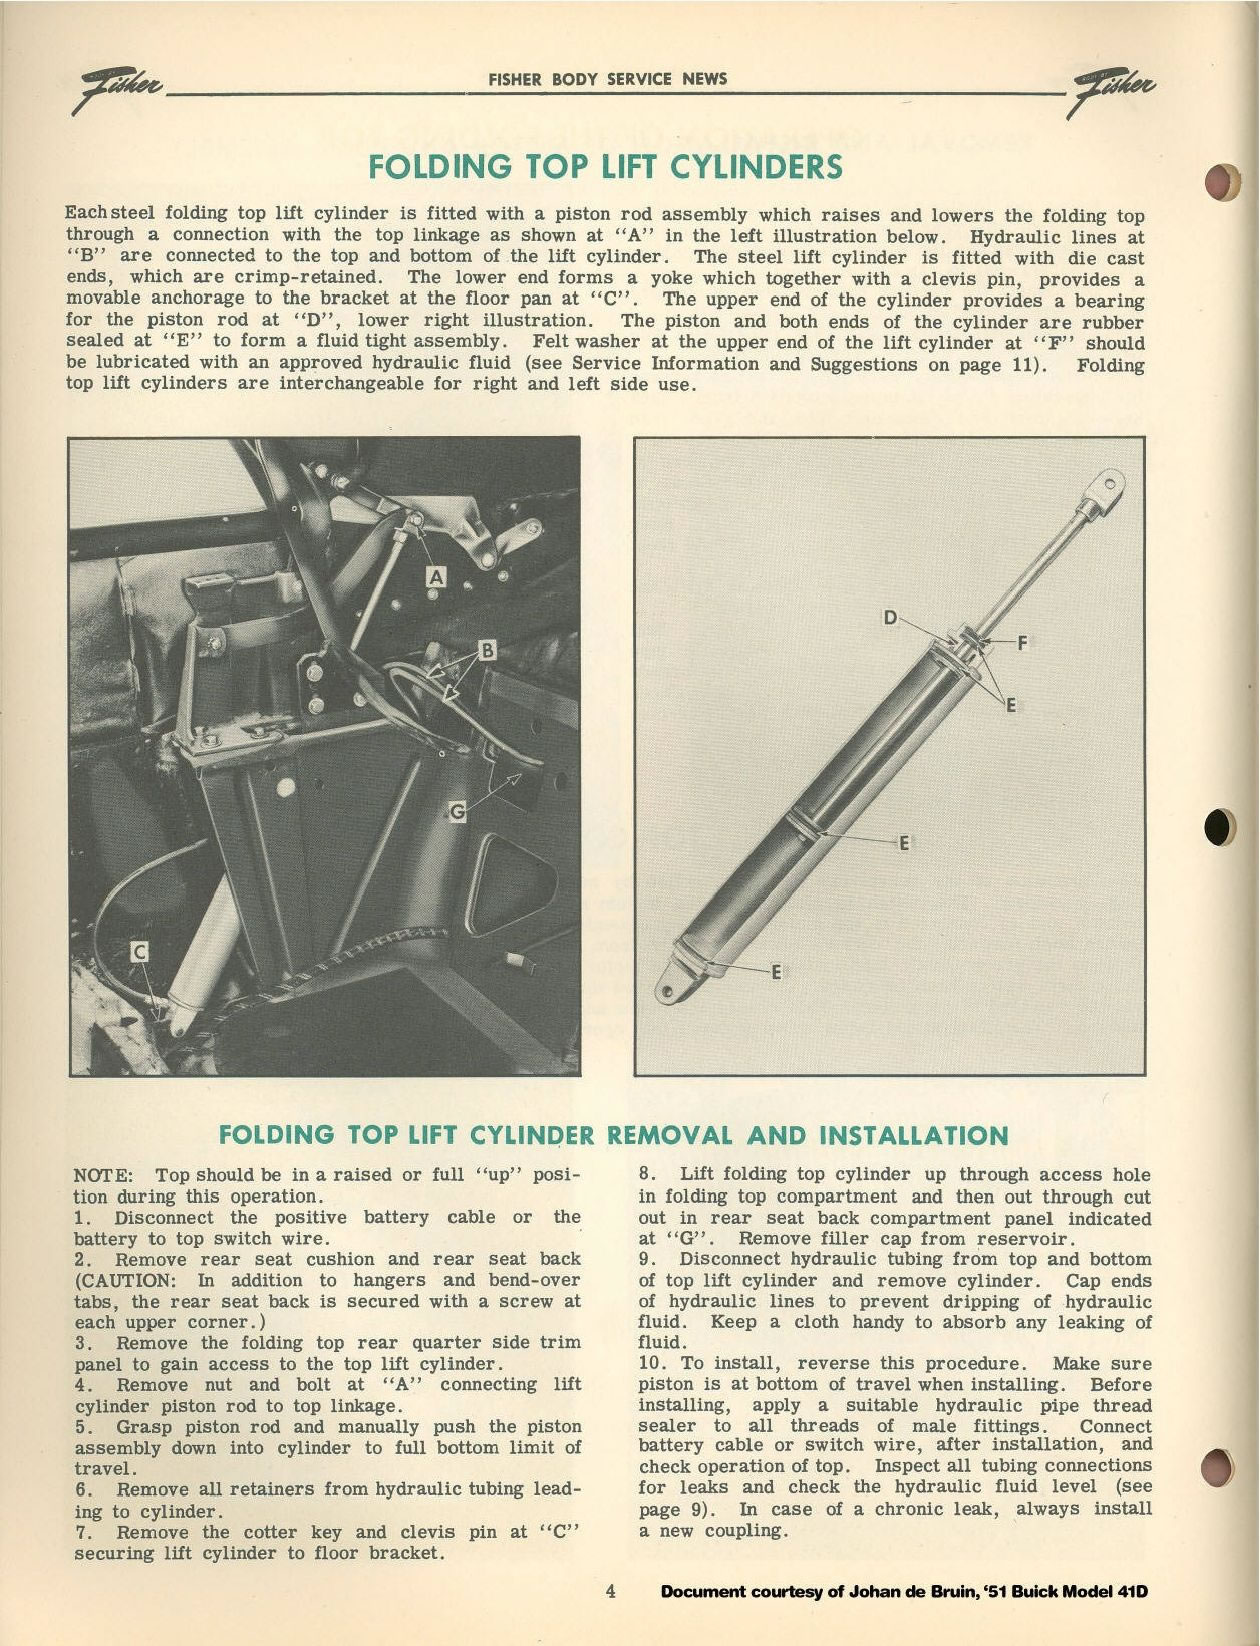 1951 Oldsmobile Convertible Top Foldout Page 4